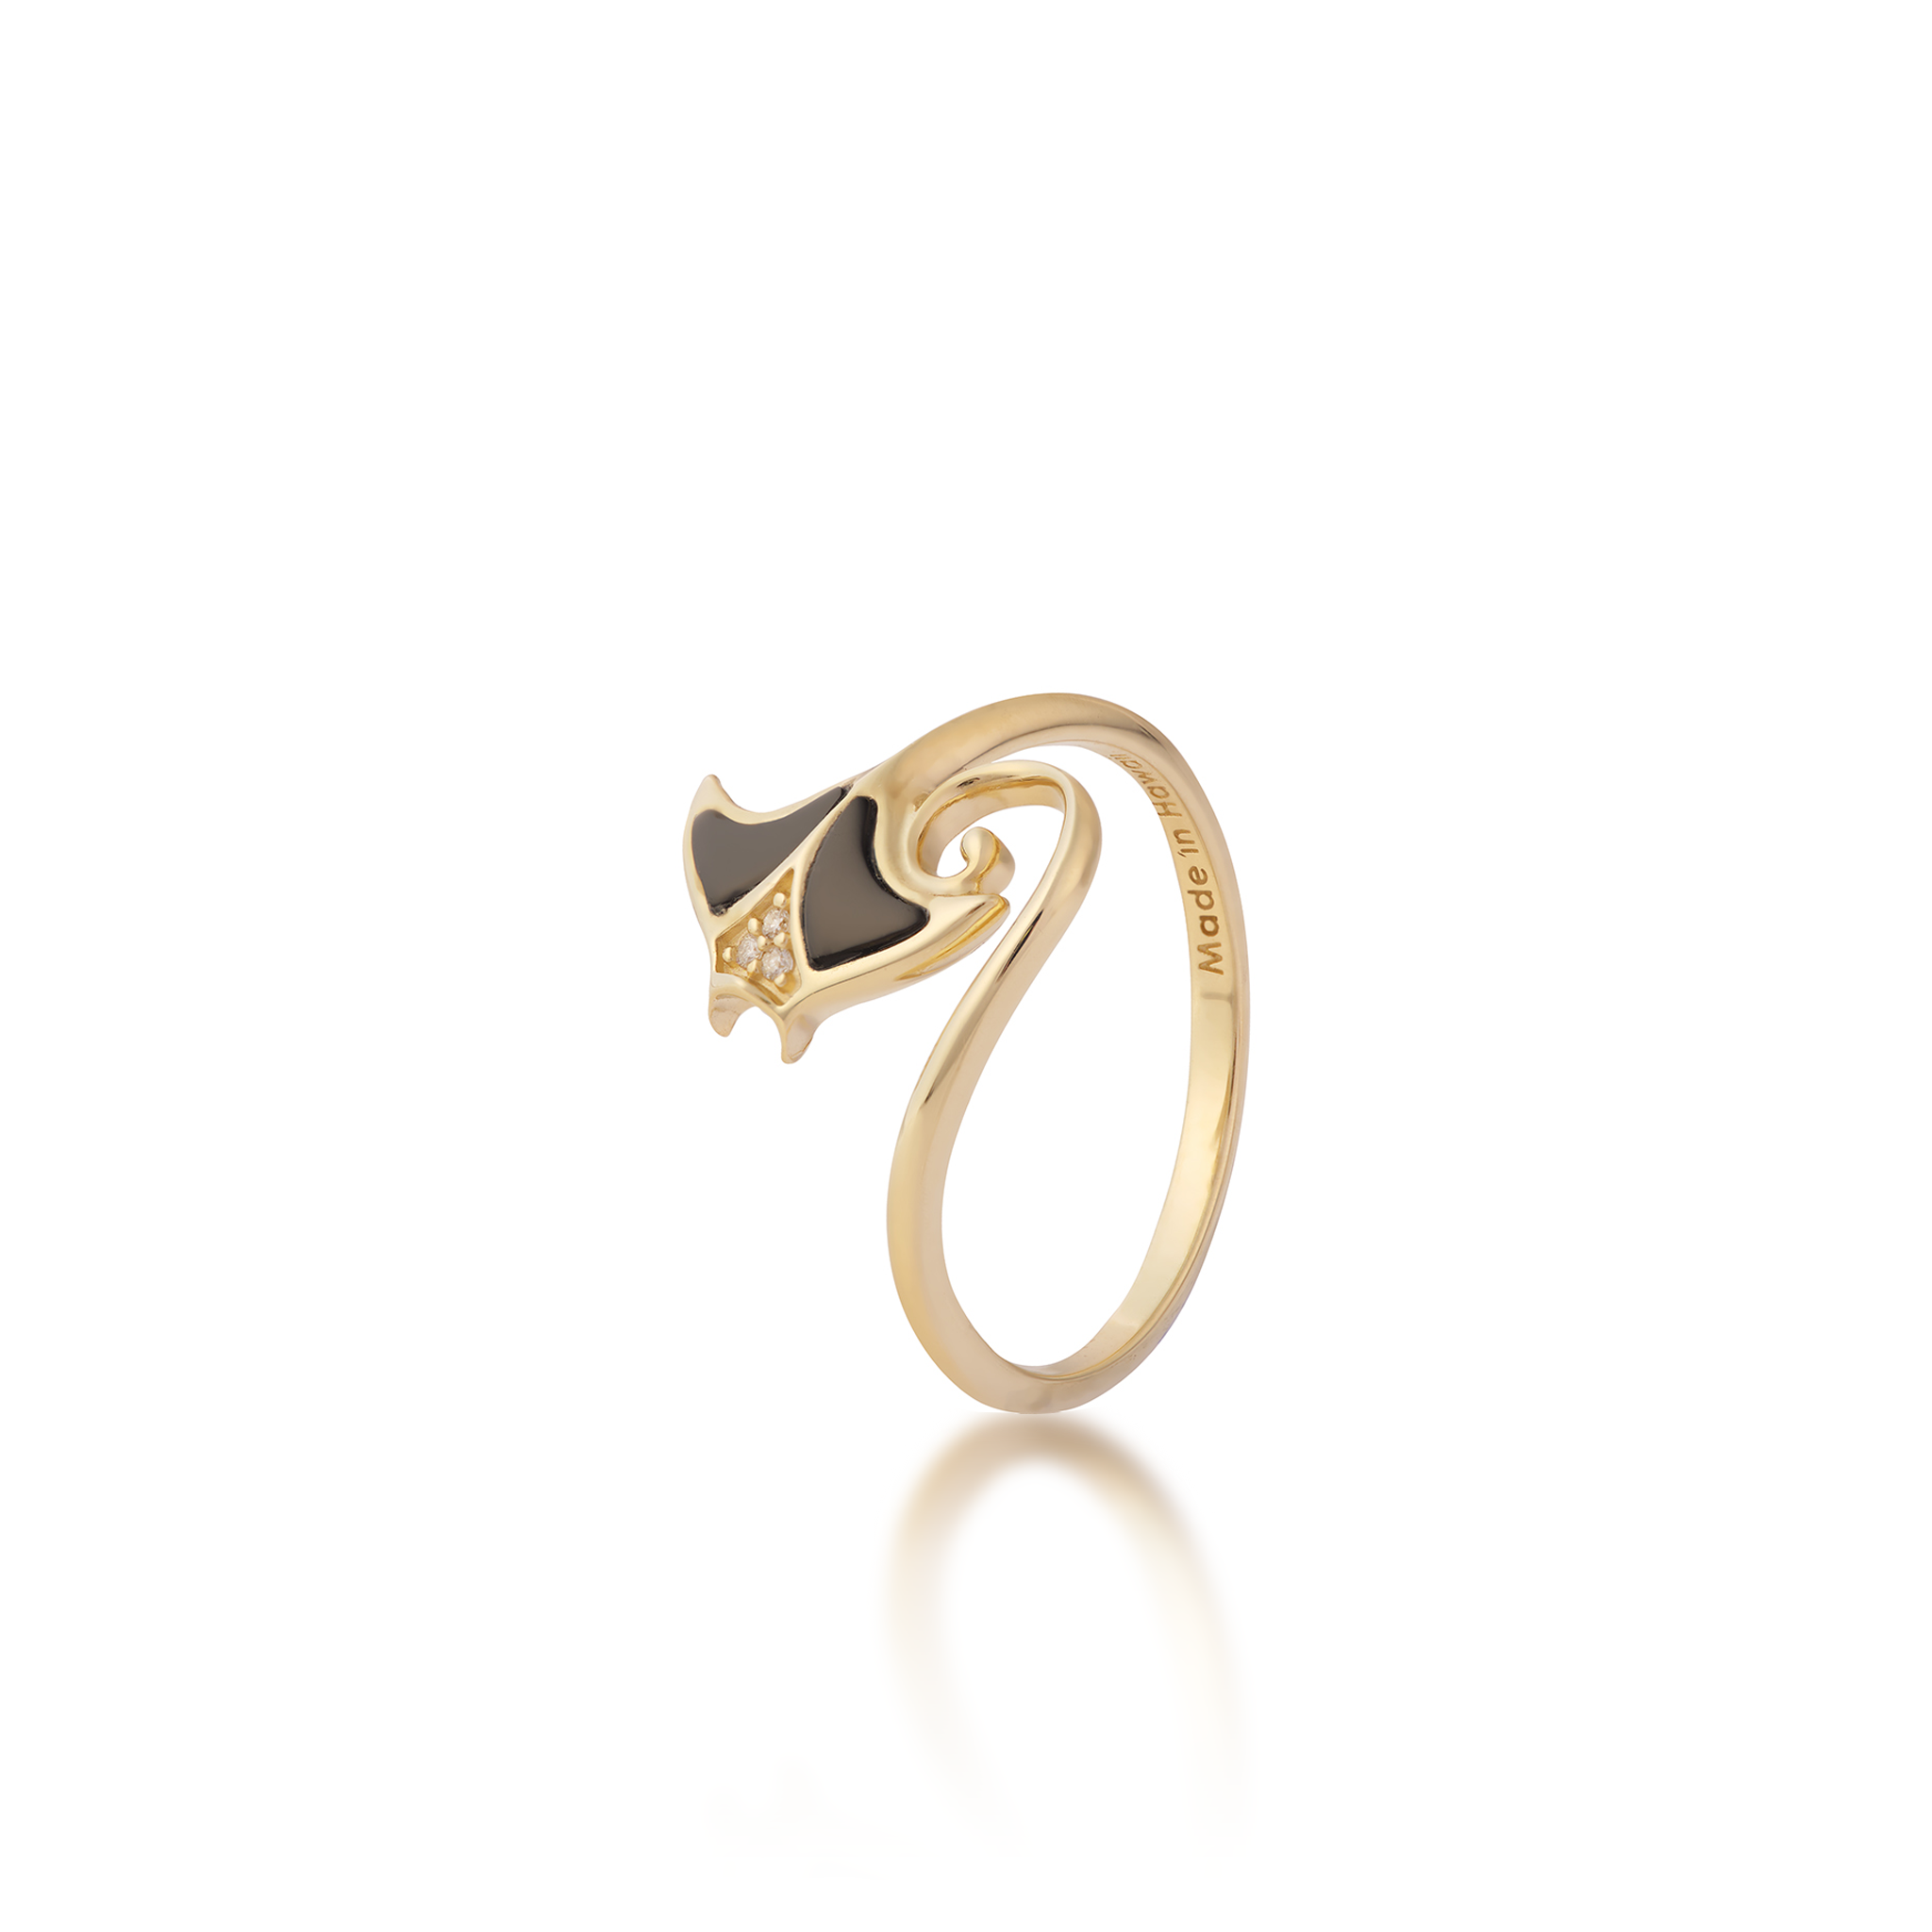 Sealife Manta Ray Black Coral Ring in Gold with Diamonds - 12mm